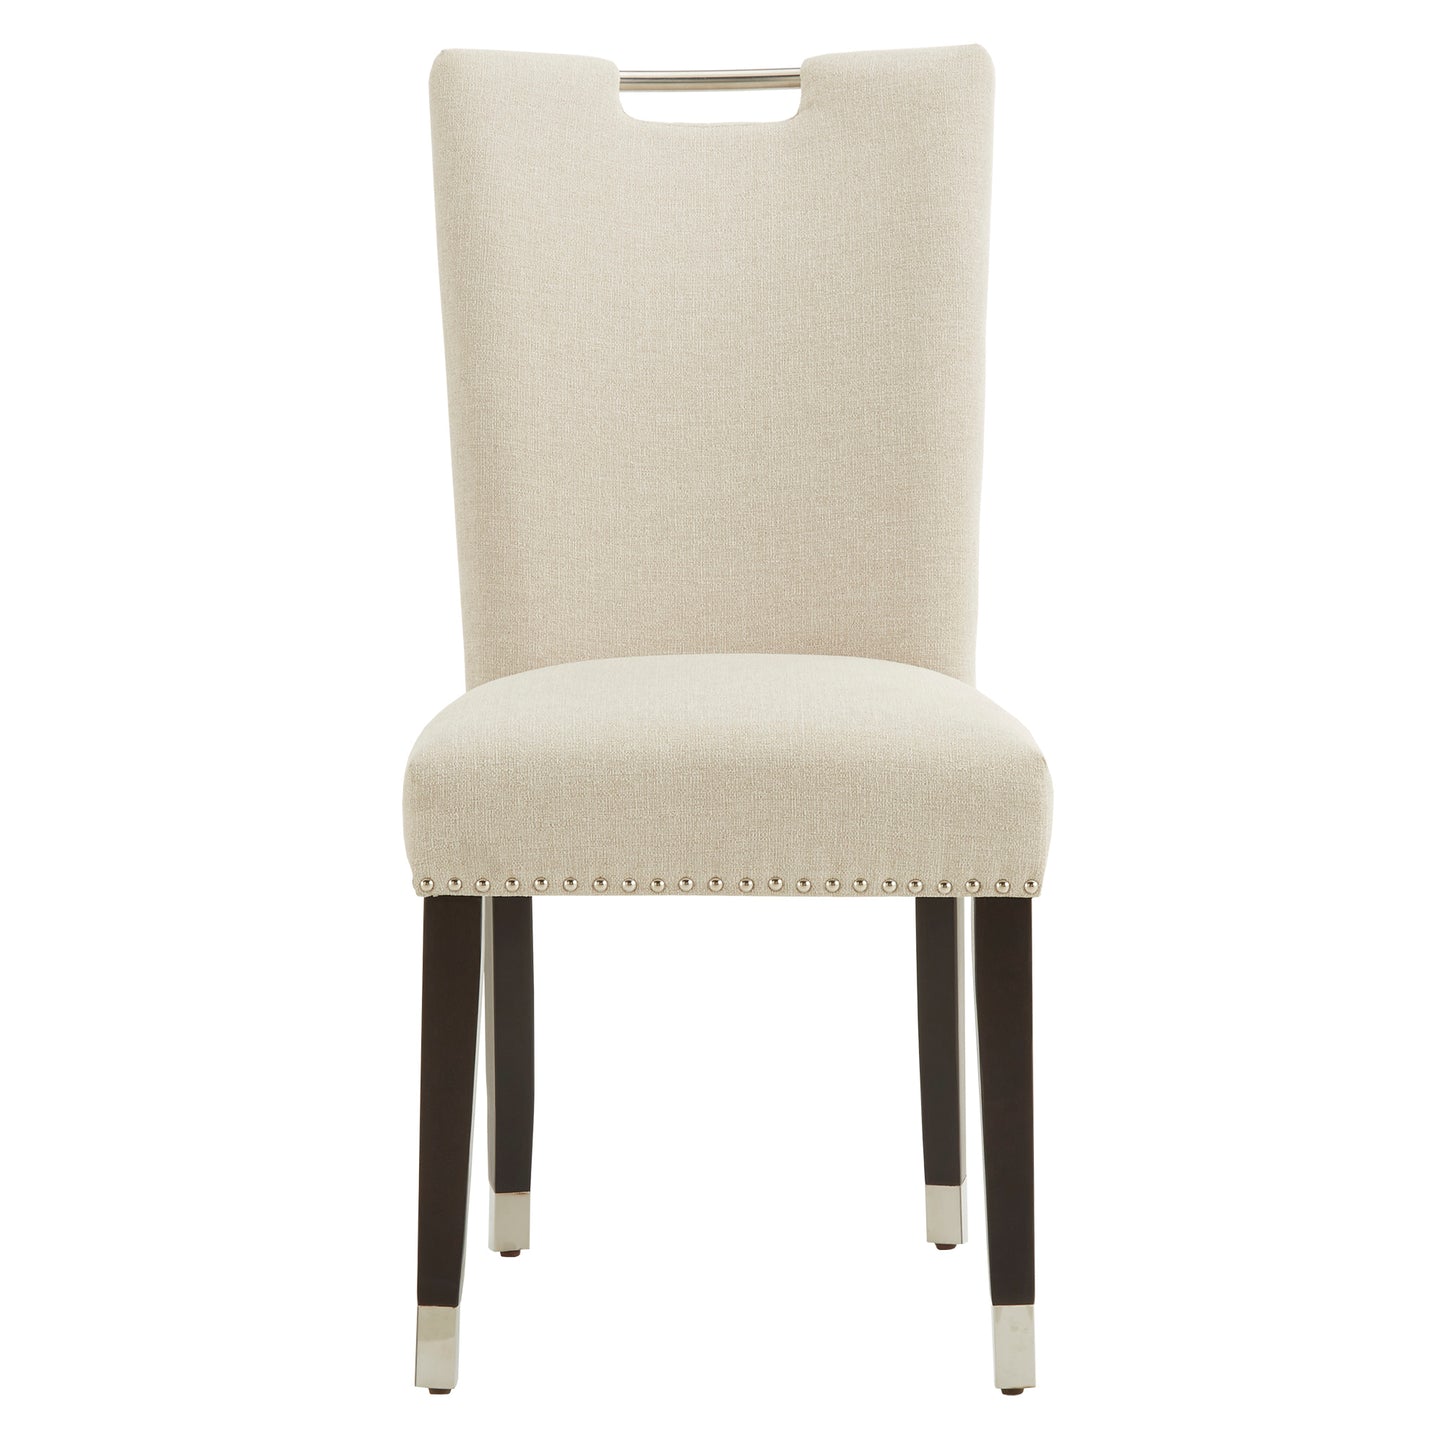 Heathered Weave Parsons Dining Chairs (Set of 2) - Black Finish, Beige, Side Chairs